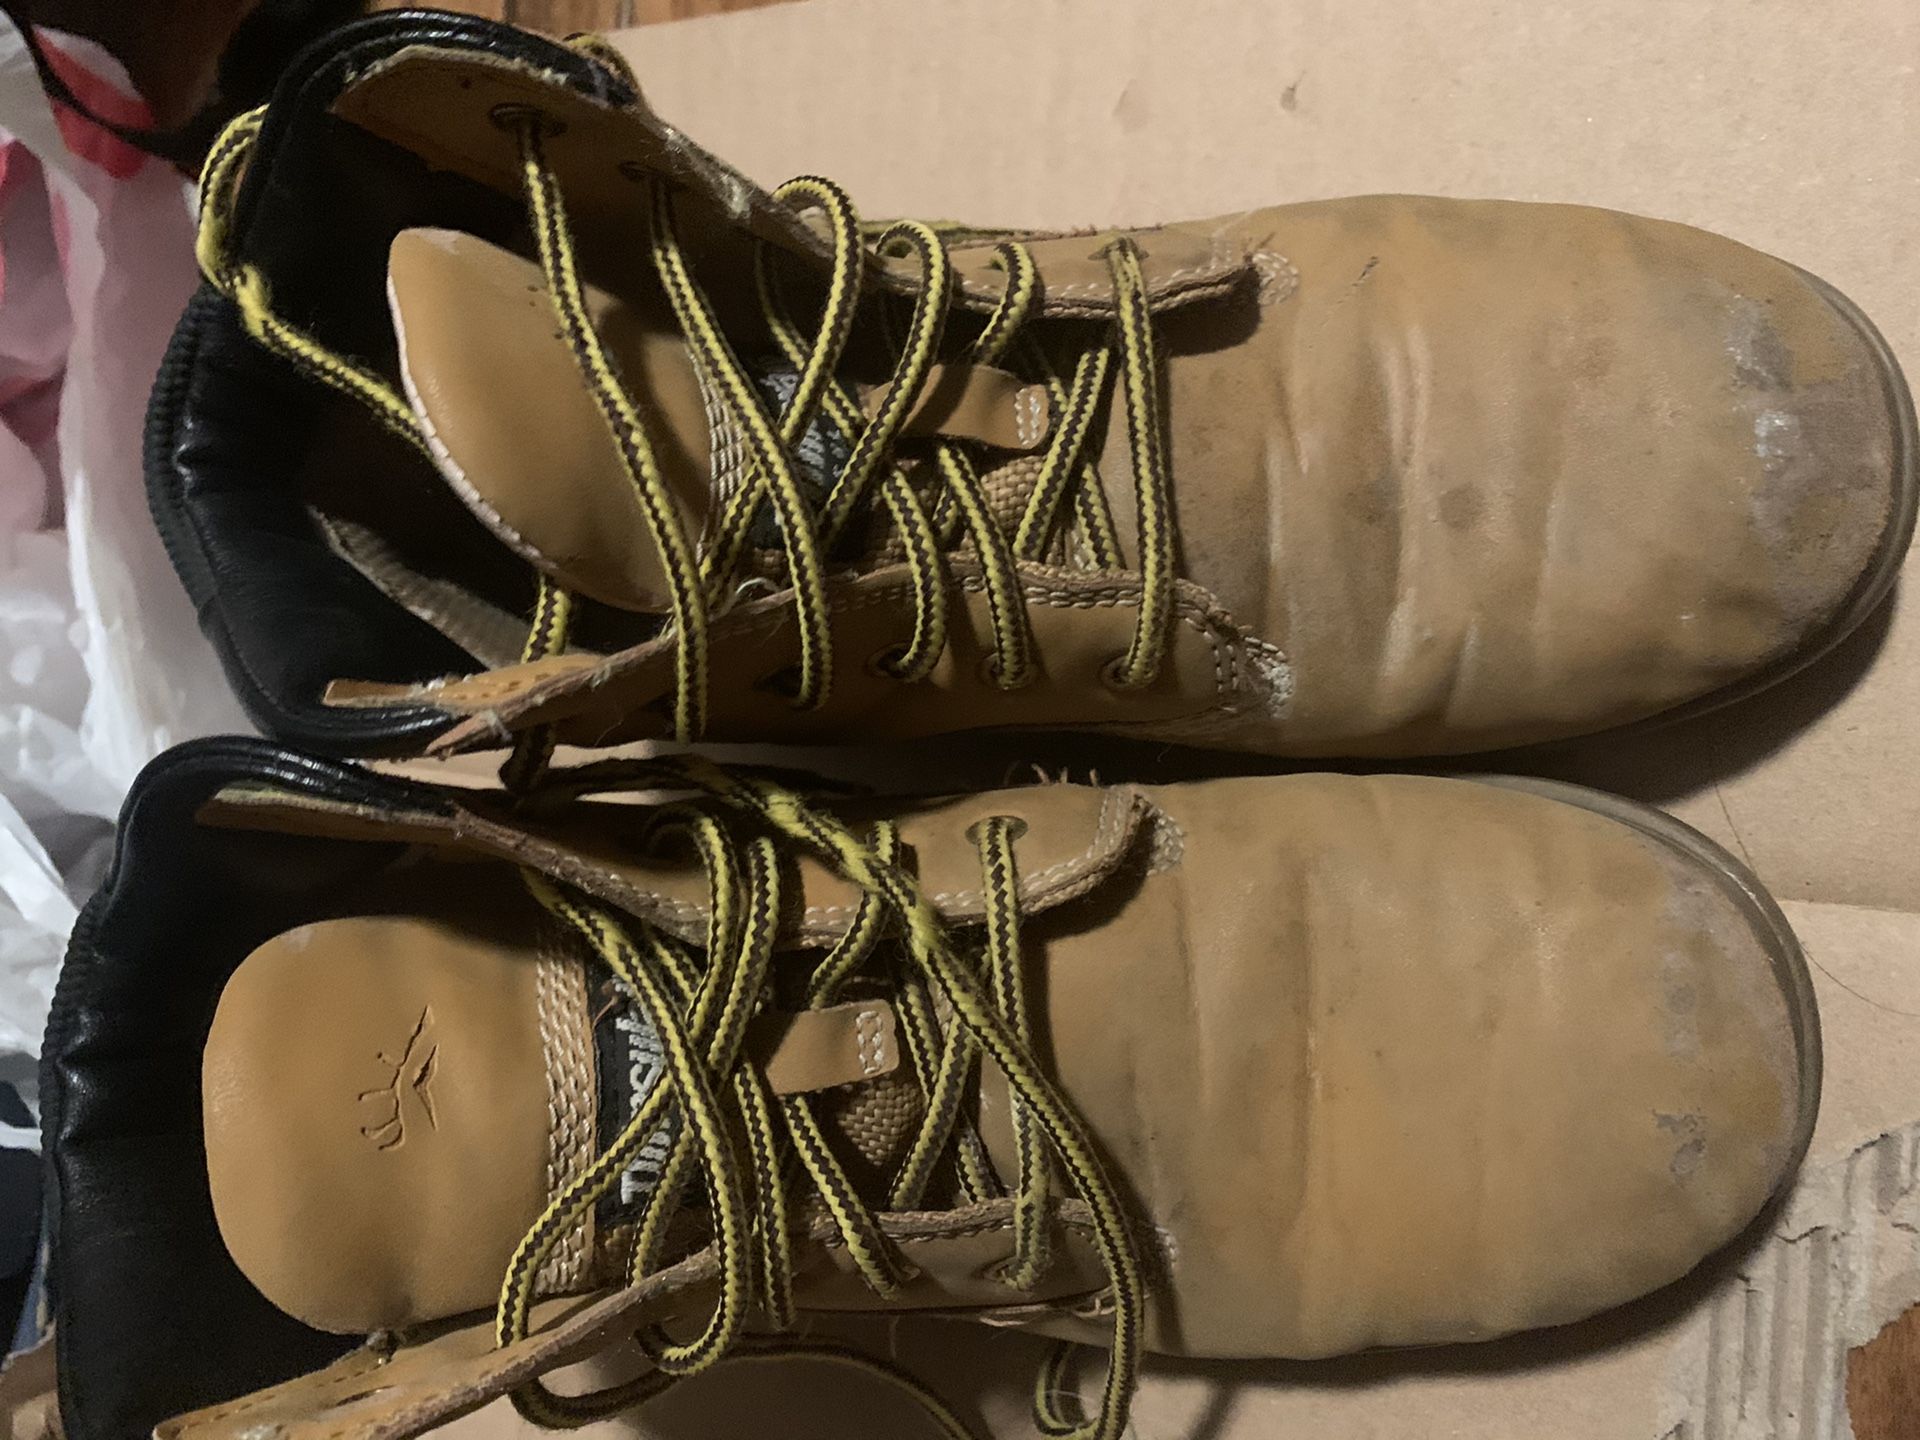 Yellow work boots - kids about size 2-3